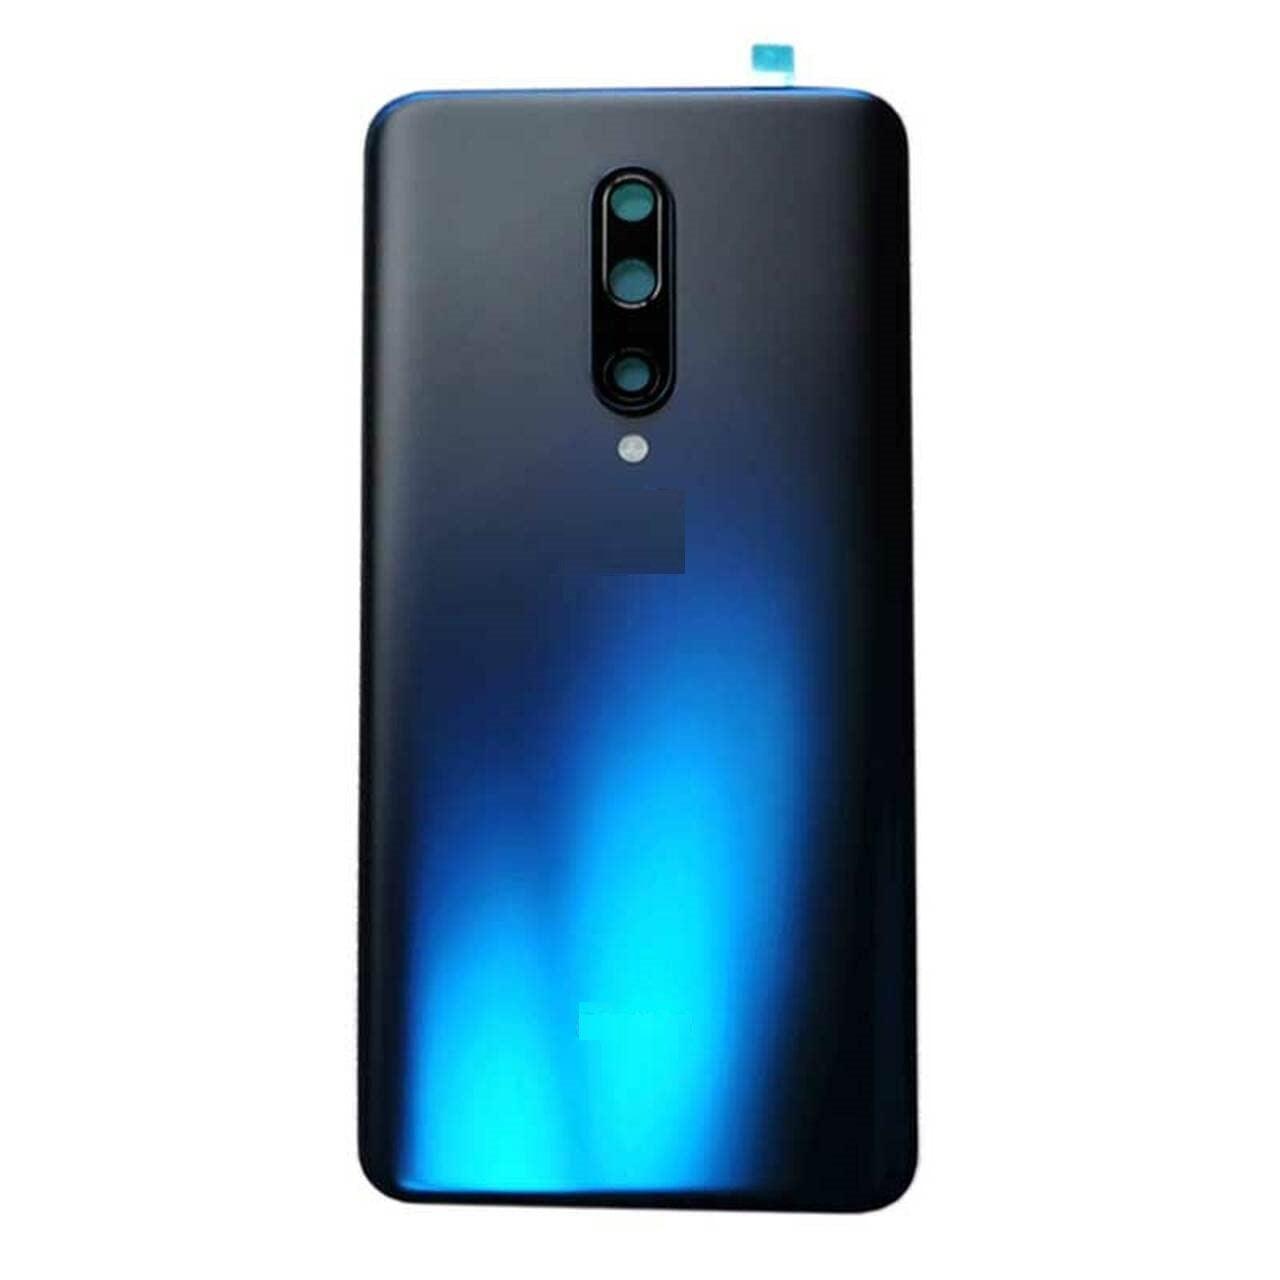 Back Glass Panel for Oneplus 7 Pro Blue with Camera Lens Module and Self Adhesive Tape